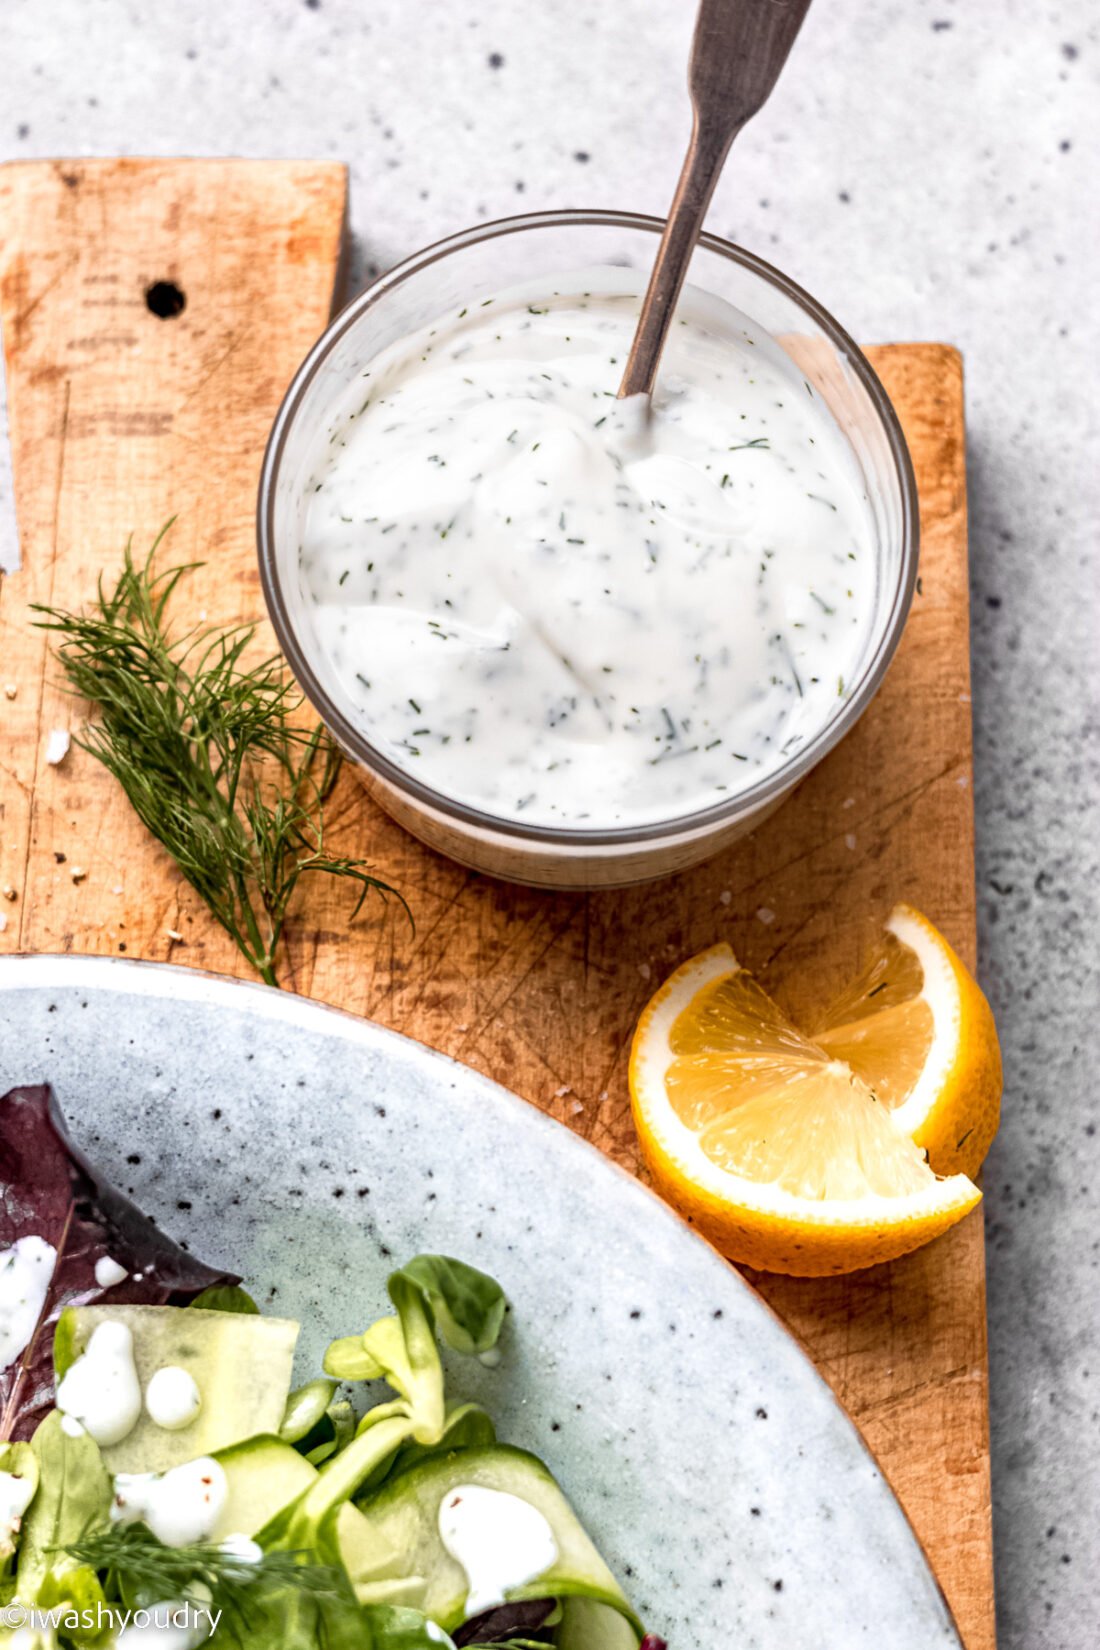 creamy dill dressing on wooden surface with lemon slices.